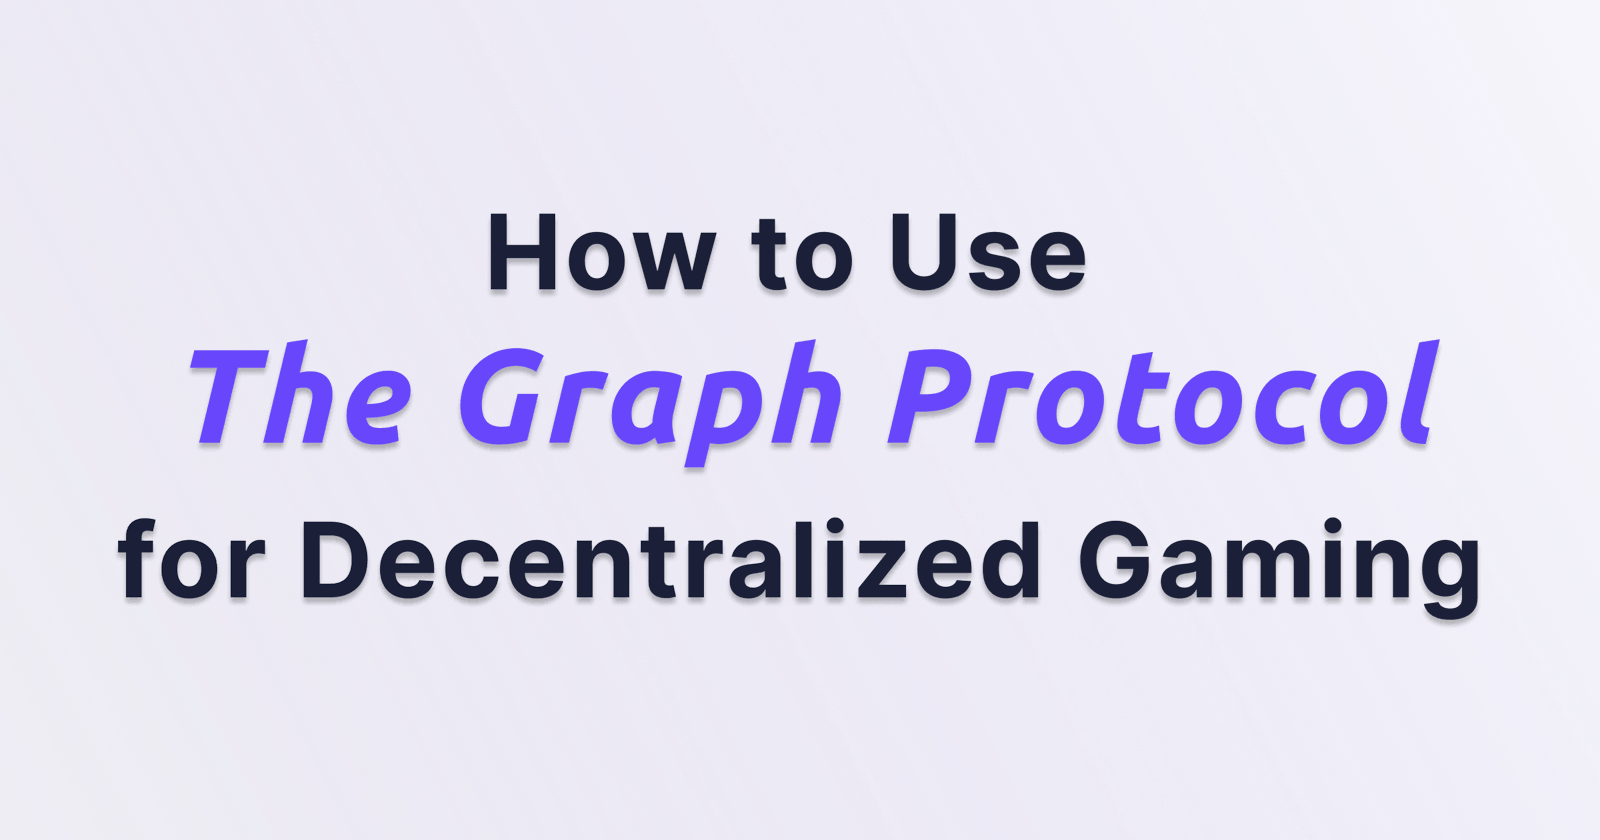 How to Use The Graph Protocol for Decentralized Gaming